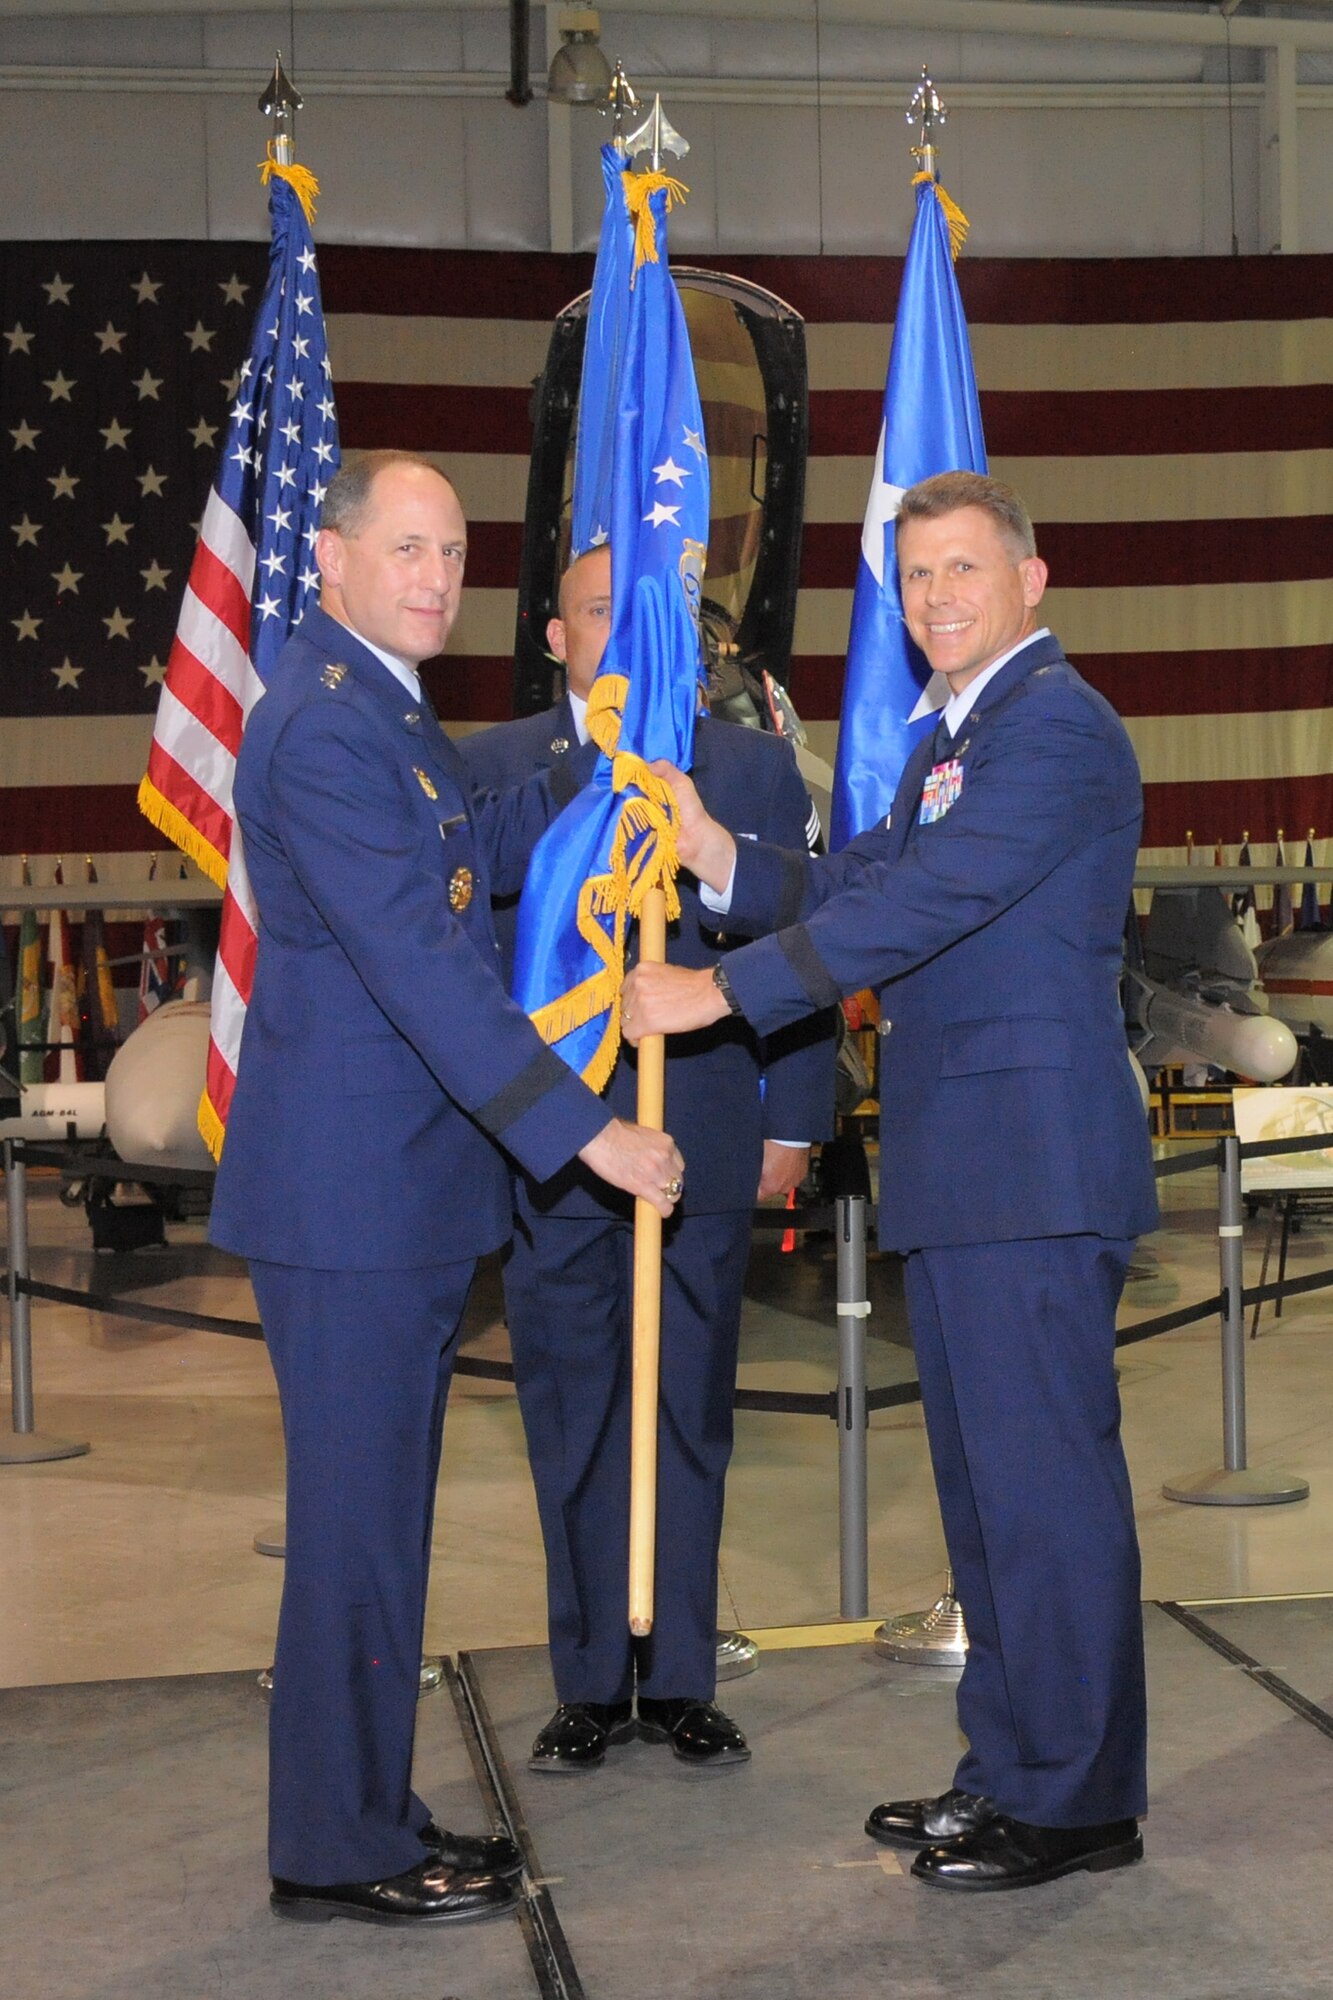 Lt. Gen. Lee K. Levy II, Air Force Sustainment Center commander, passes the guidon to Brig. Gen. Steven J. Bleymaier during the Ogden Air Logistics Complex change of command ceremony Monday, Aug. 31, at Hill Air Force Base, Utah. Bleymaier has a diversified background in fighter and heavy aircraft and munitions maintenance, acquisitions logistics, legislative liaison and politico-military plans. At Hill, he will lead a team responsible for cost, schedule and quality of depot repair, overhaul and modification of the A-10, C-130, F-16, F-22, F-35 and T-38 aircraft, the Minuteman intercontinental ballistic missile system, and numerous commodities.